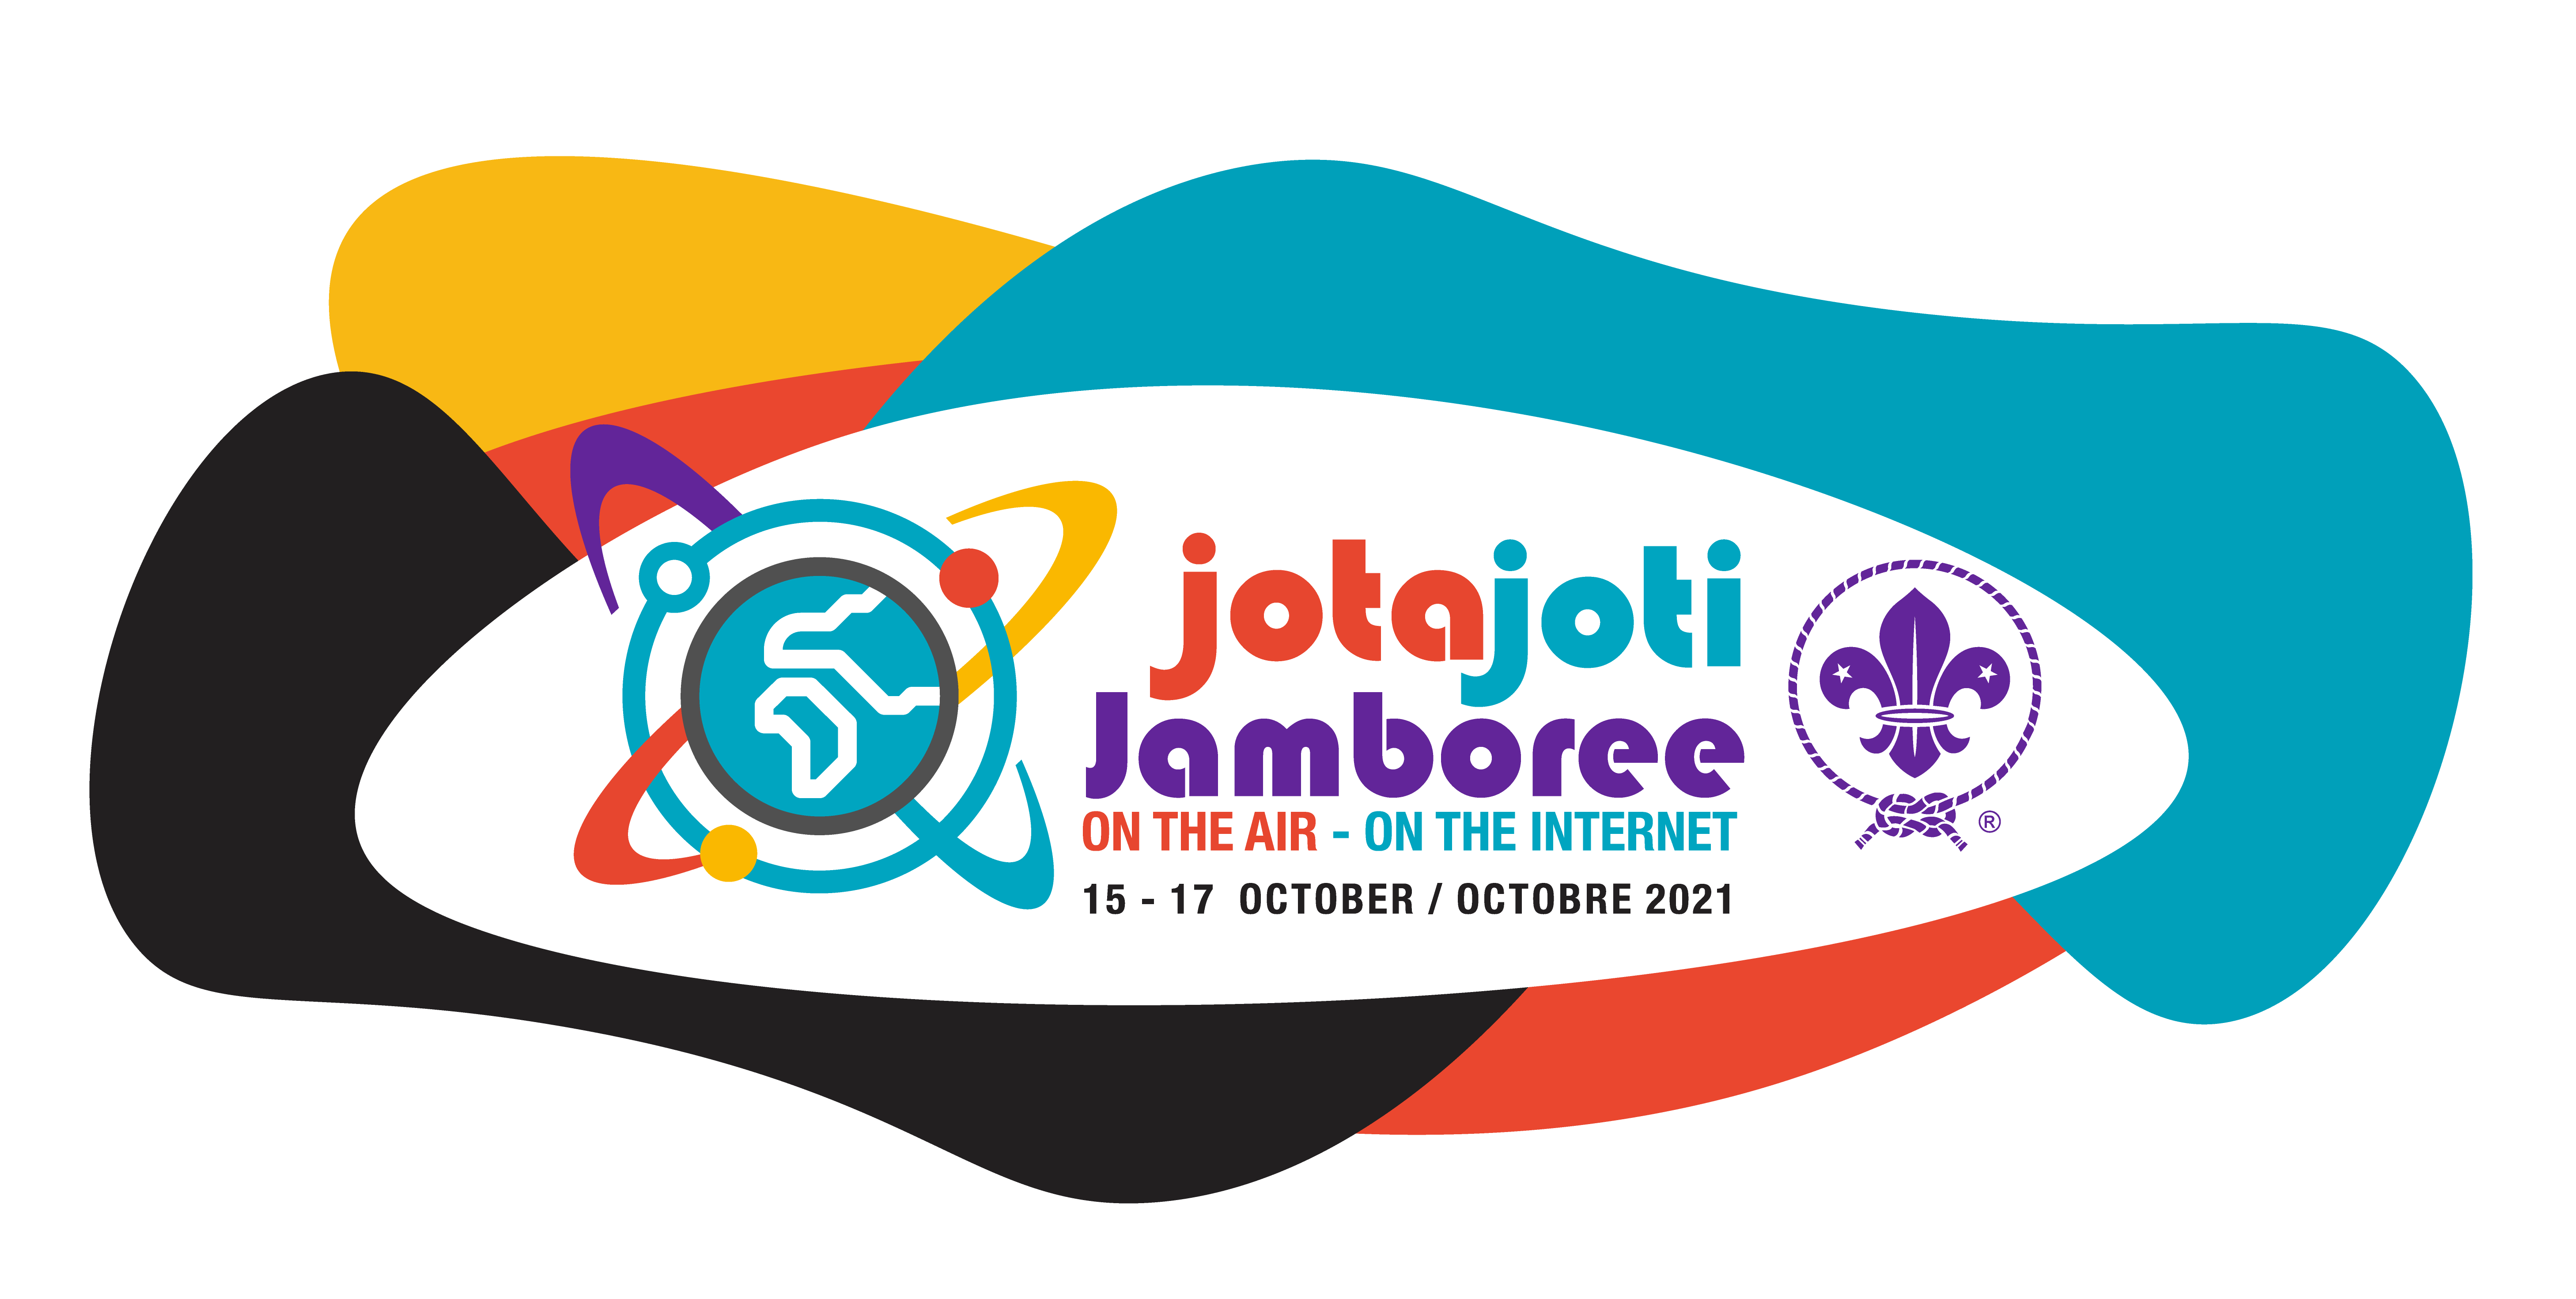 Scout Group Directory Jota Joti 2021 The World S Largest Digital Scout Event